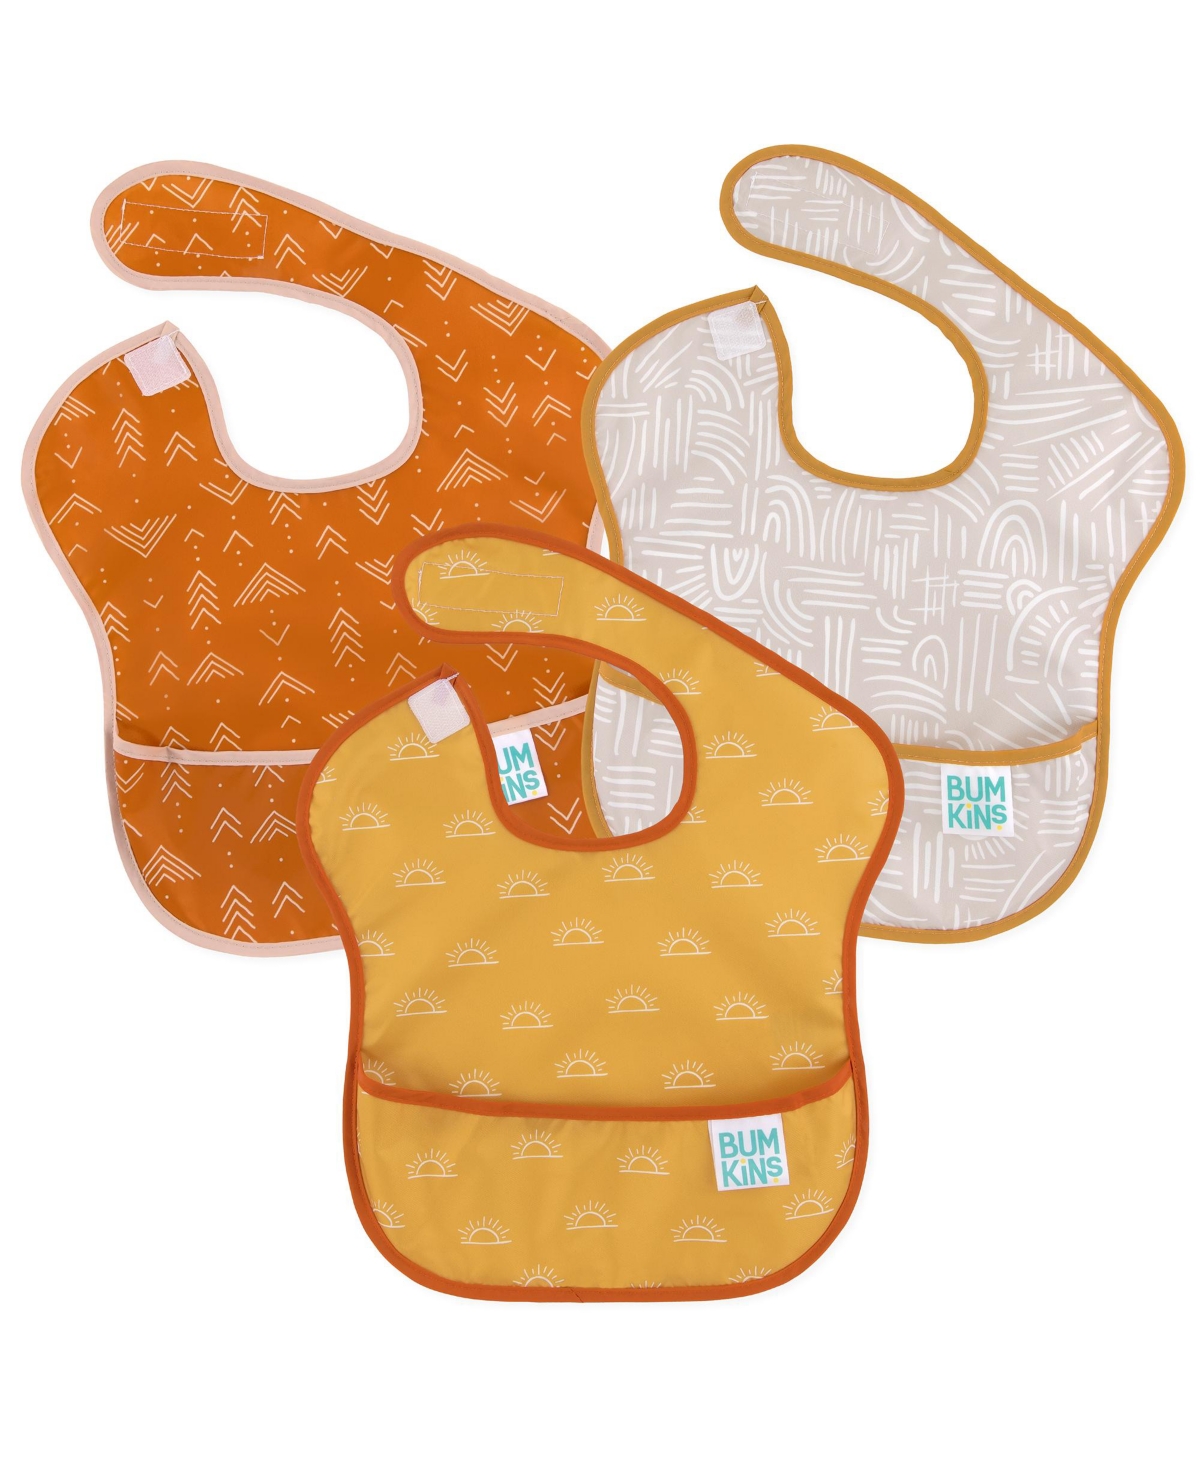 Bumkins Superbib Baby Boys And Girls Bibs, Pack Of 3 In Sunshine,wander And Grounded